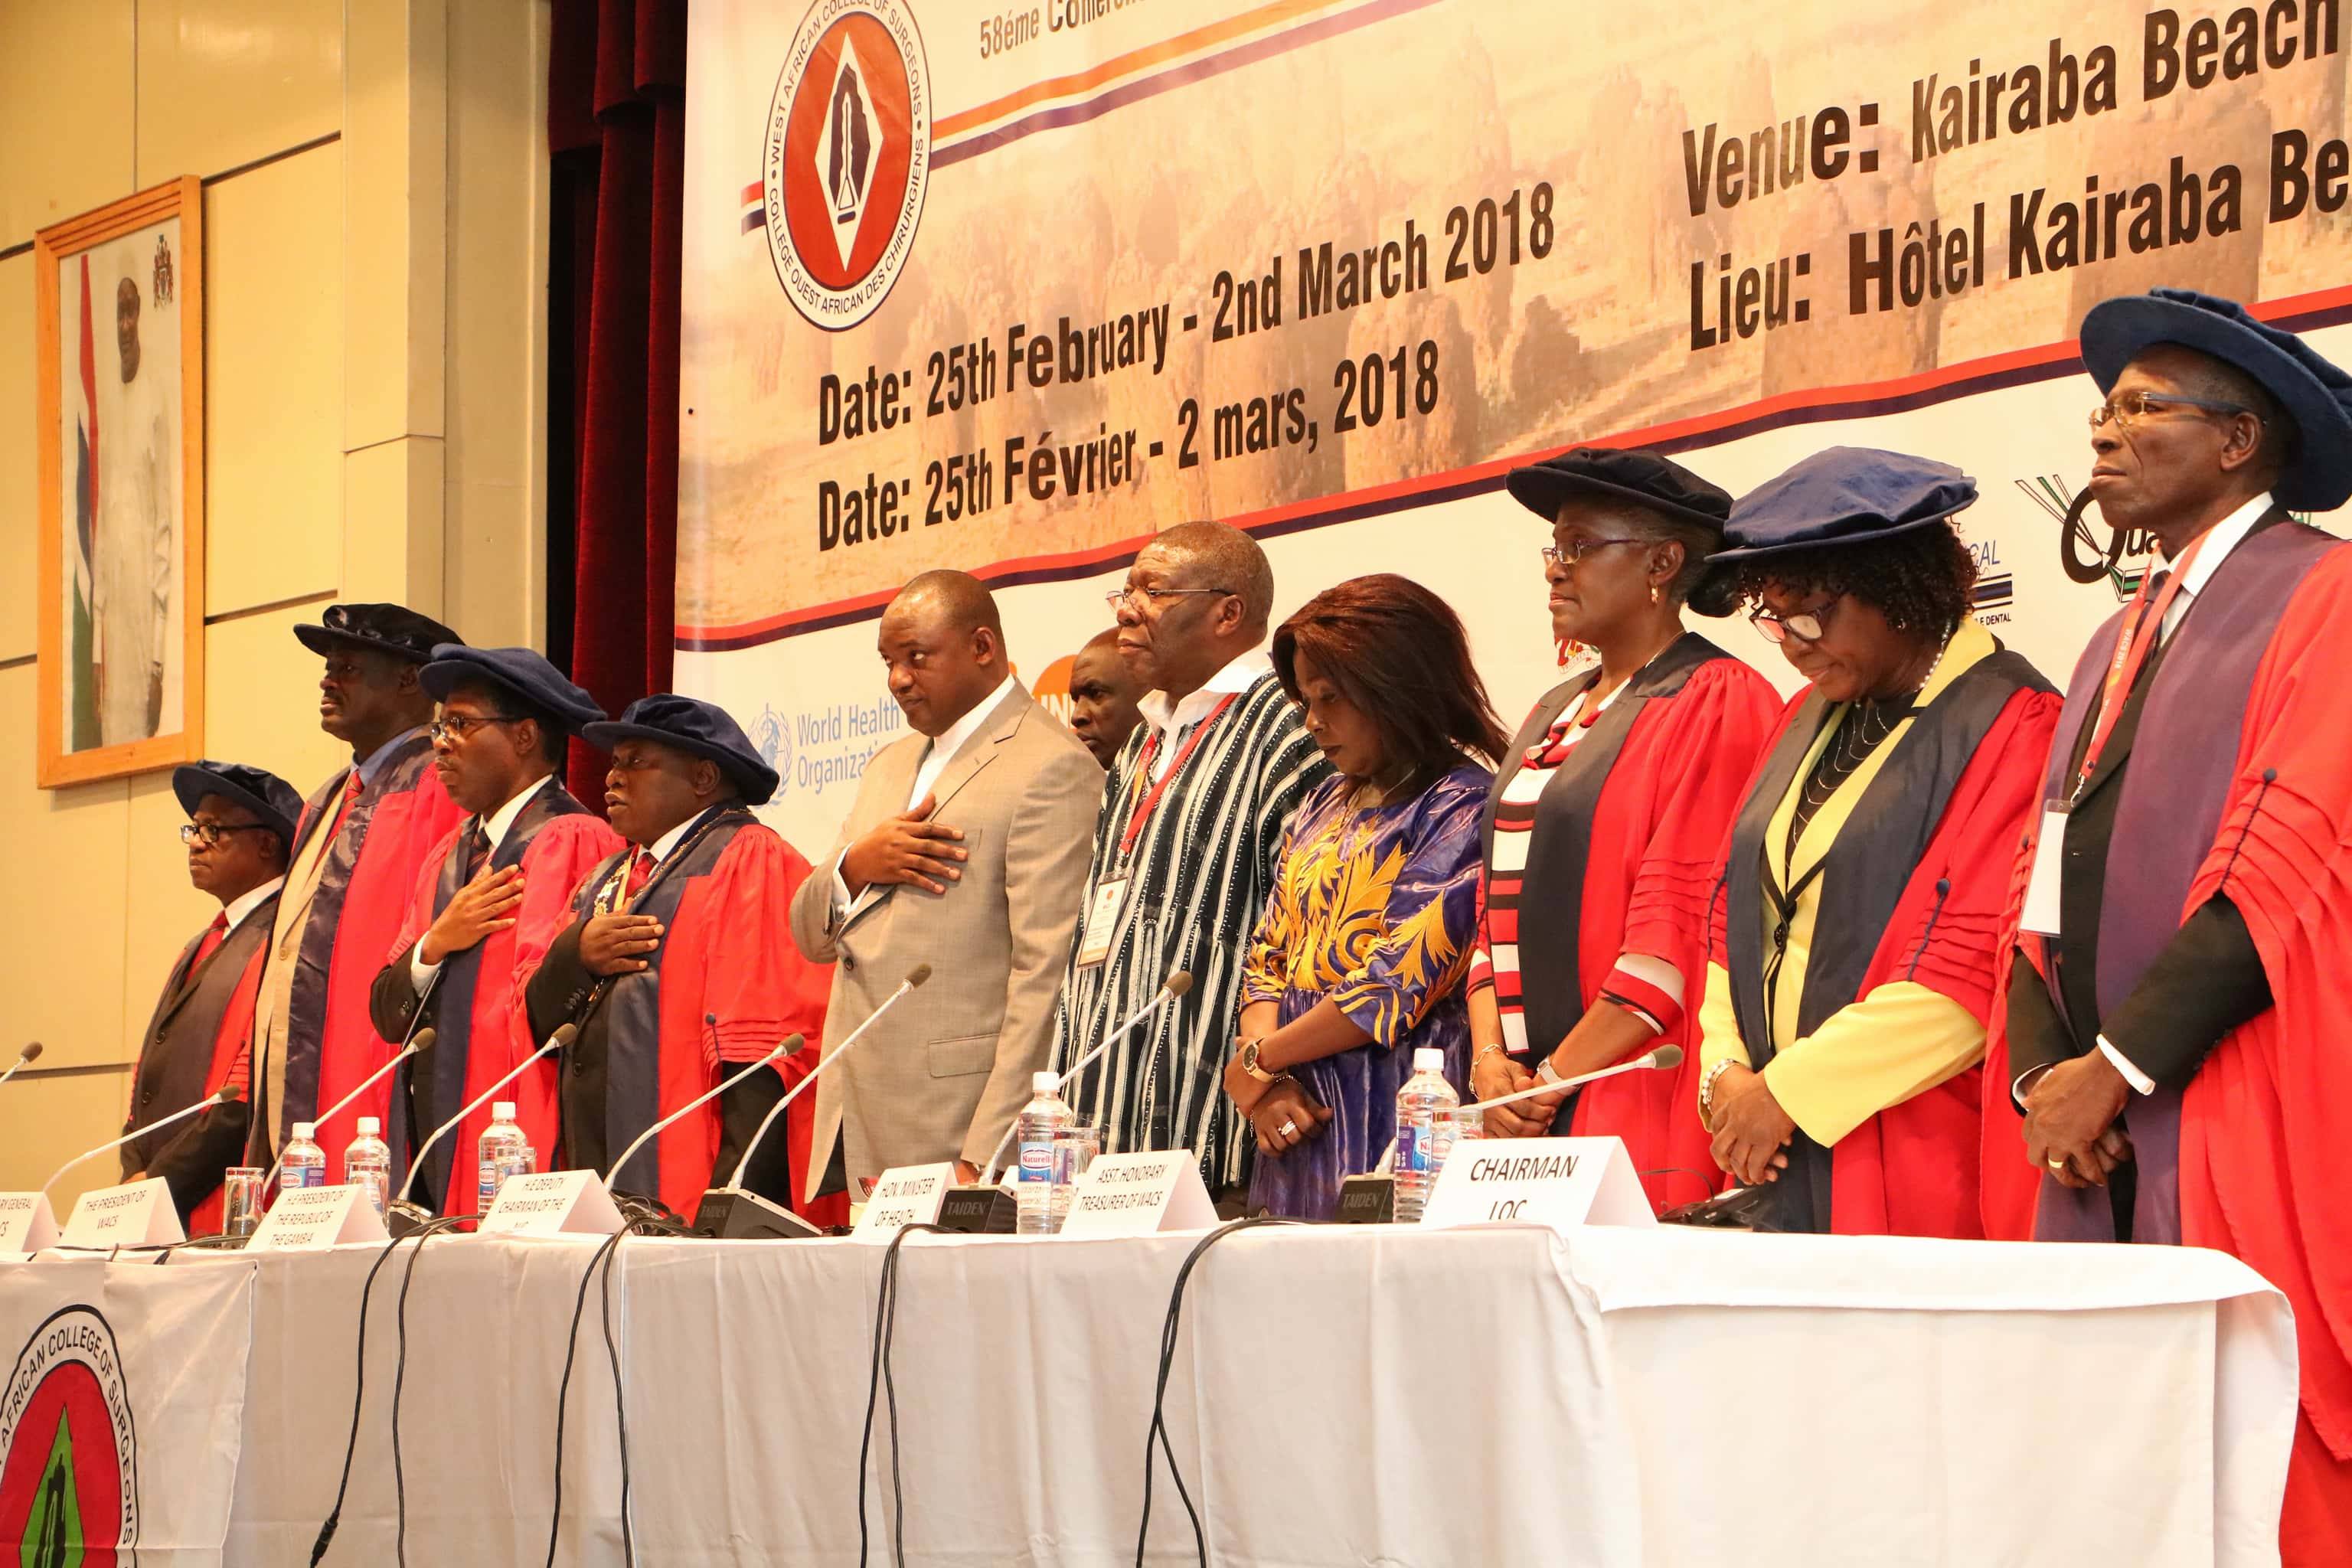 58TH ANNUAL CONFERENCE AND SCIENTIFIC MEETING OF THE WEST AFRICAN COLLEGE OF SURGEONS. 